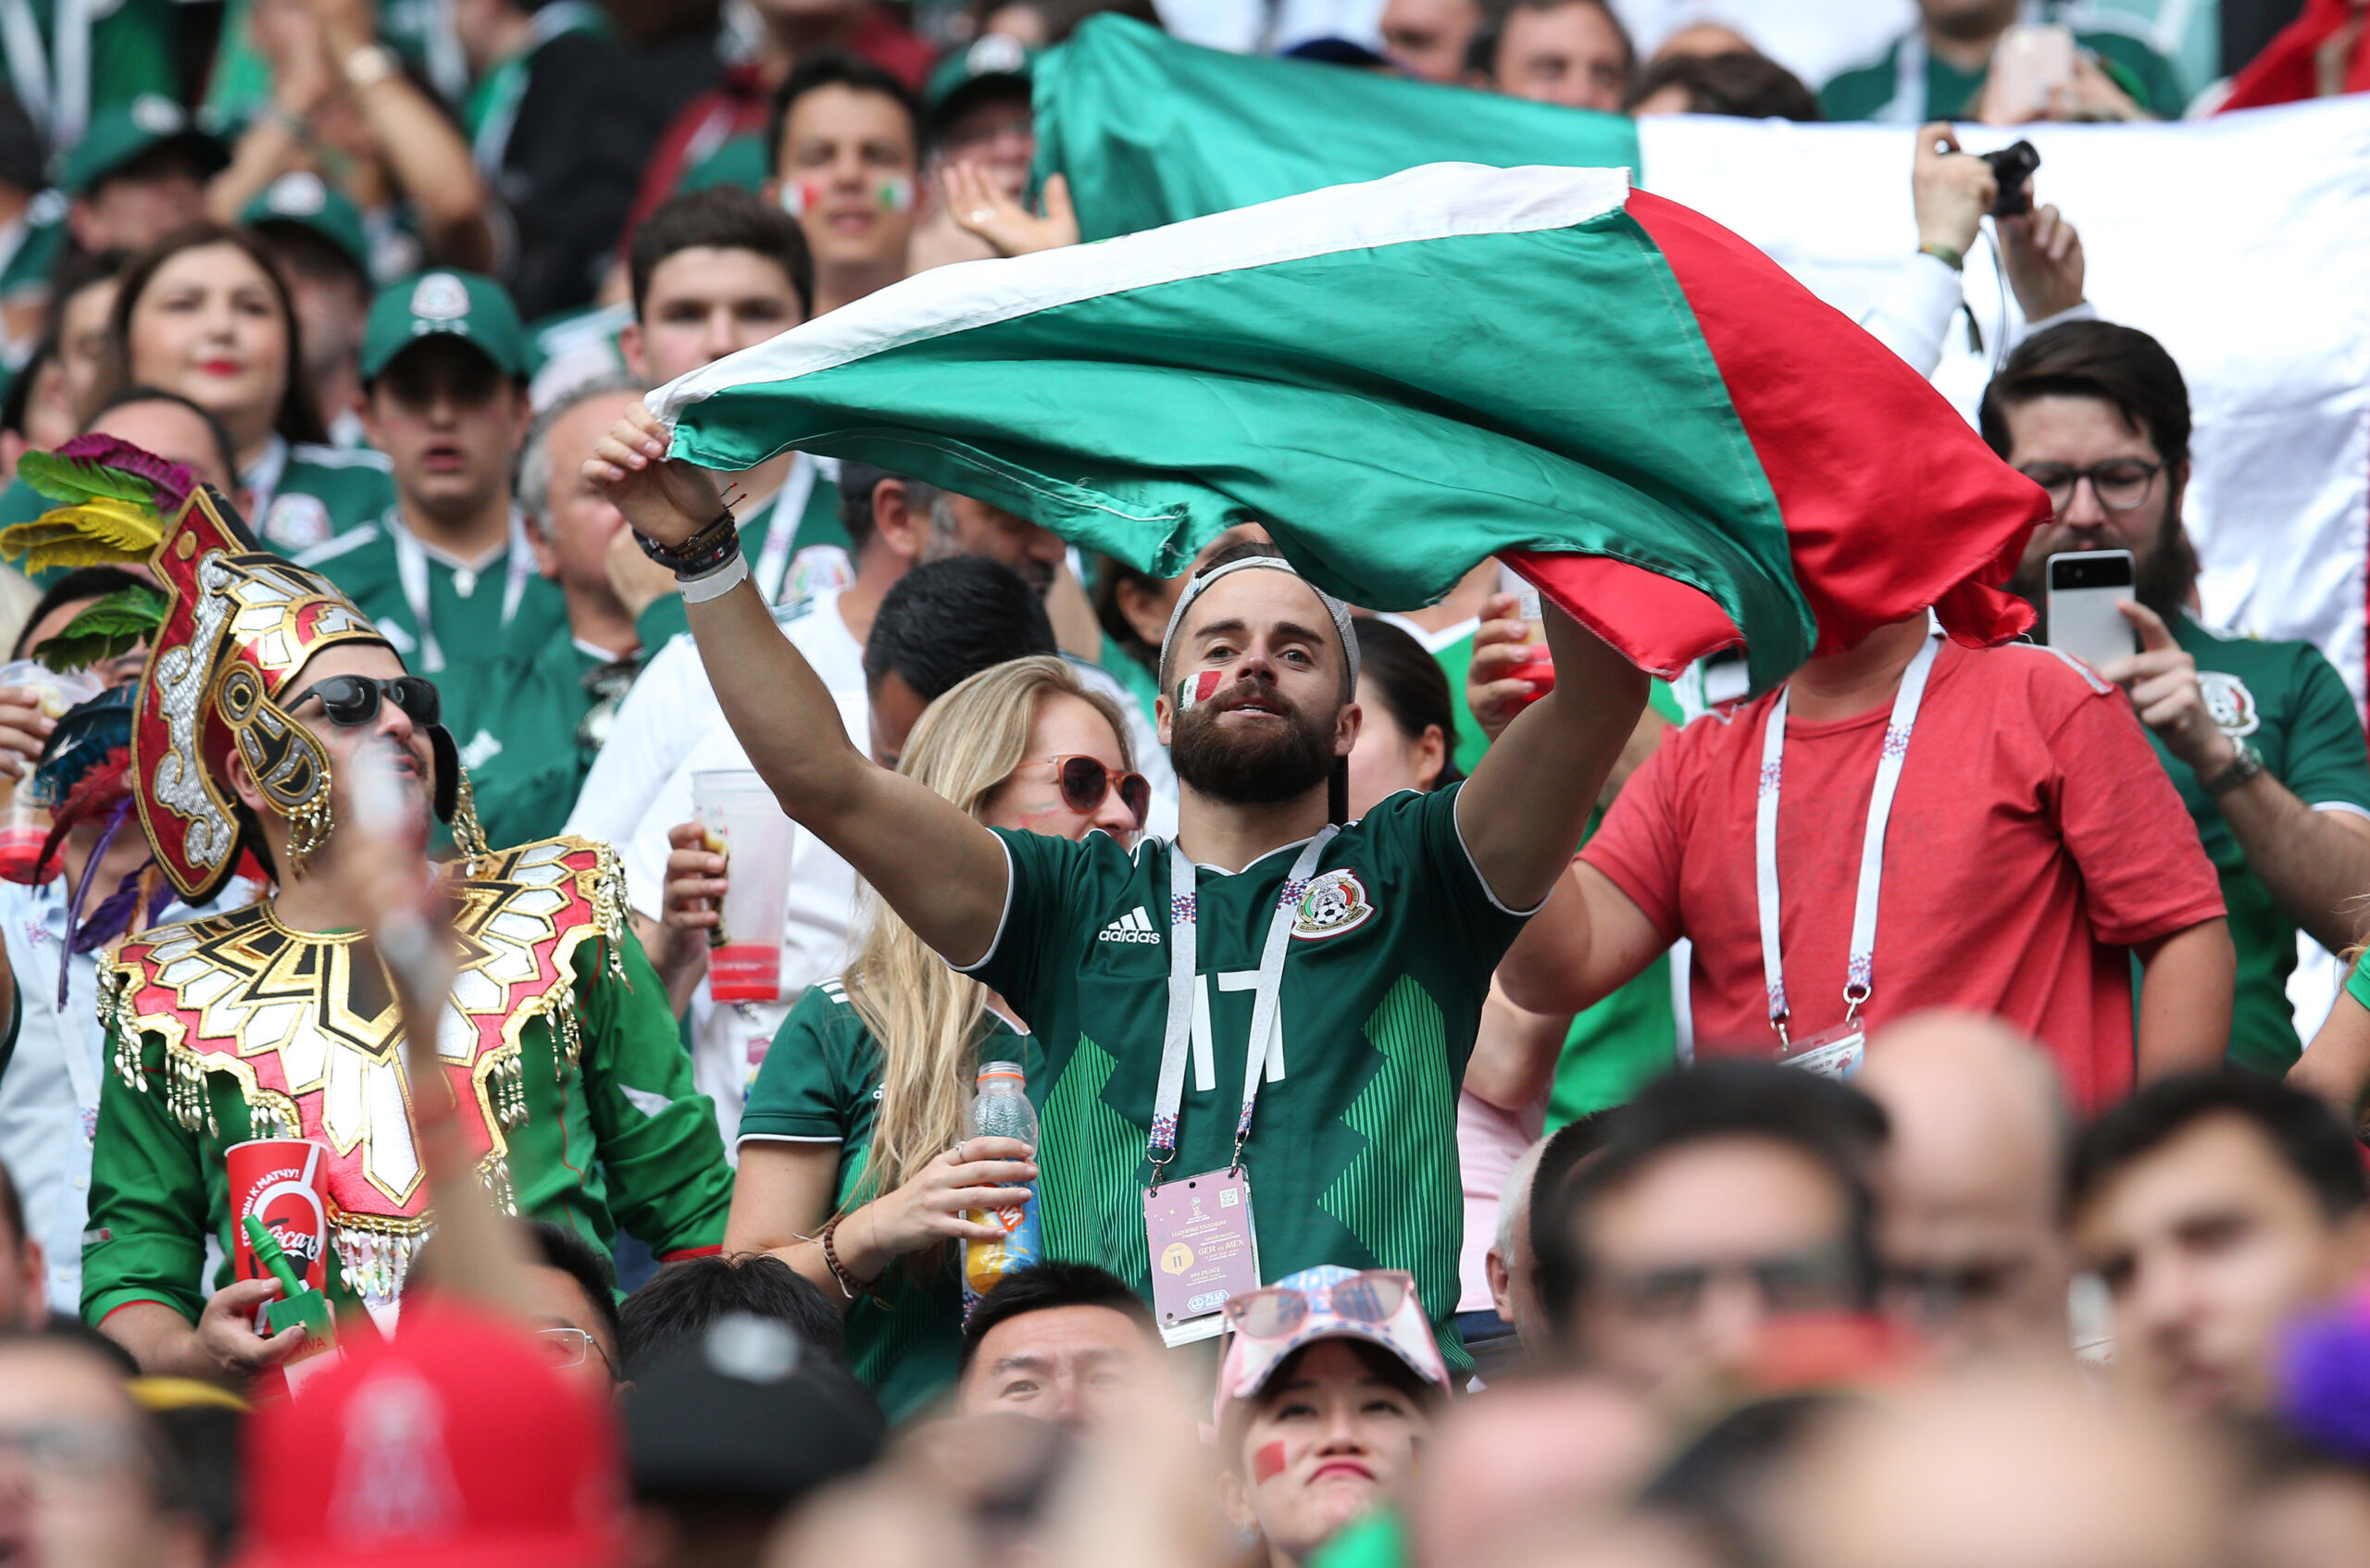 Mexicans fans celebrate Lozano gol in Fifa World Cup Russia 2018, Group F, football match between GERMANY v MEXICO in Luzhniki Stadium in Moscow.